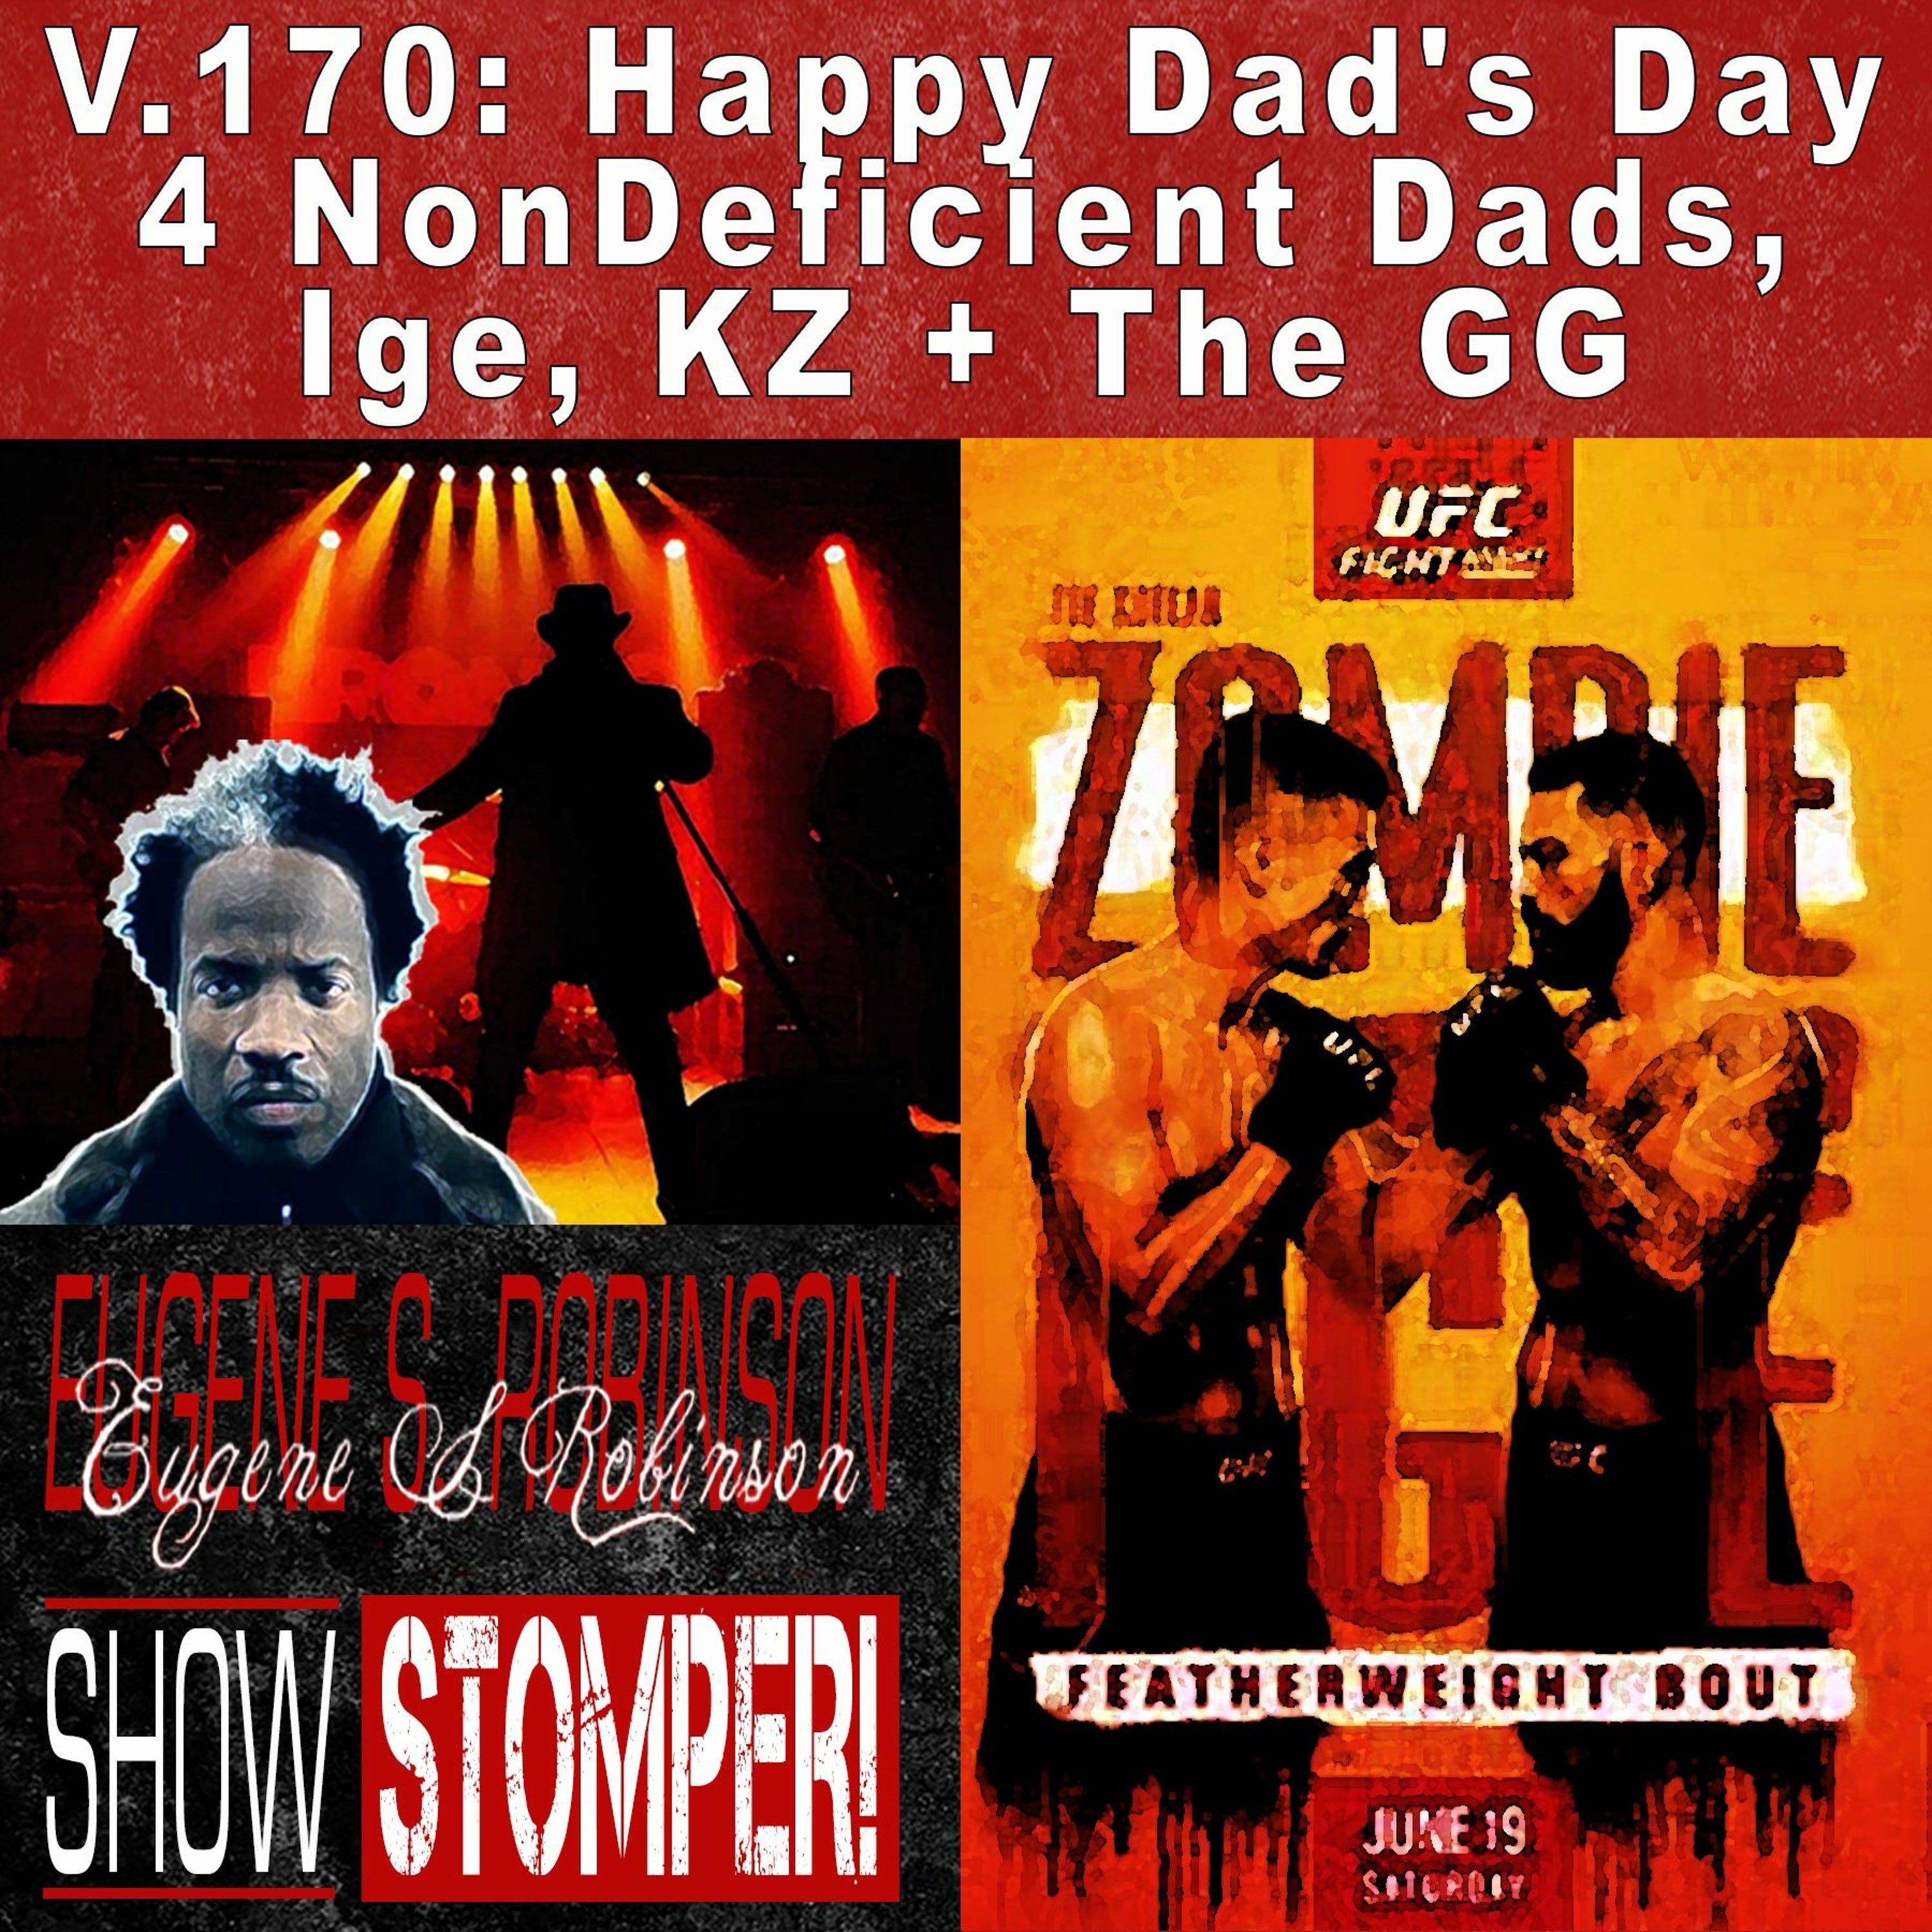 V.170: Happy Dad's Day 4 NonDeficient Dads, Ige, KZ + The GG on The Eugene S. Robinson Show Stomper!